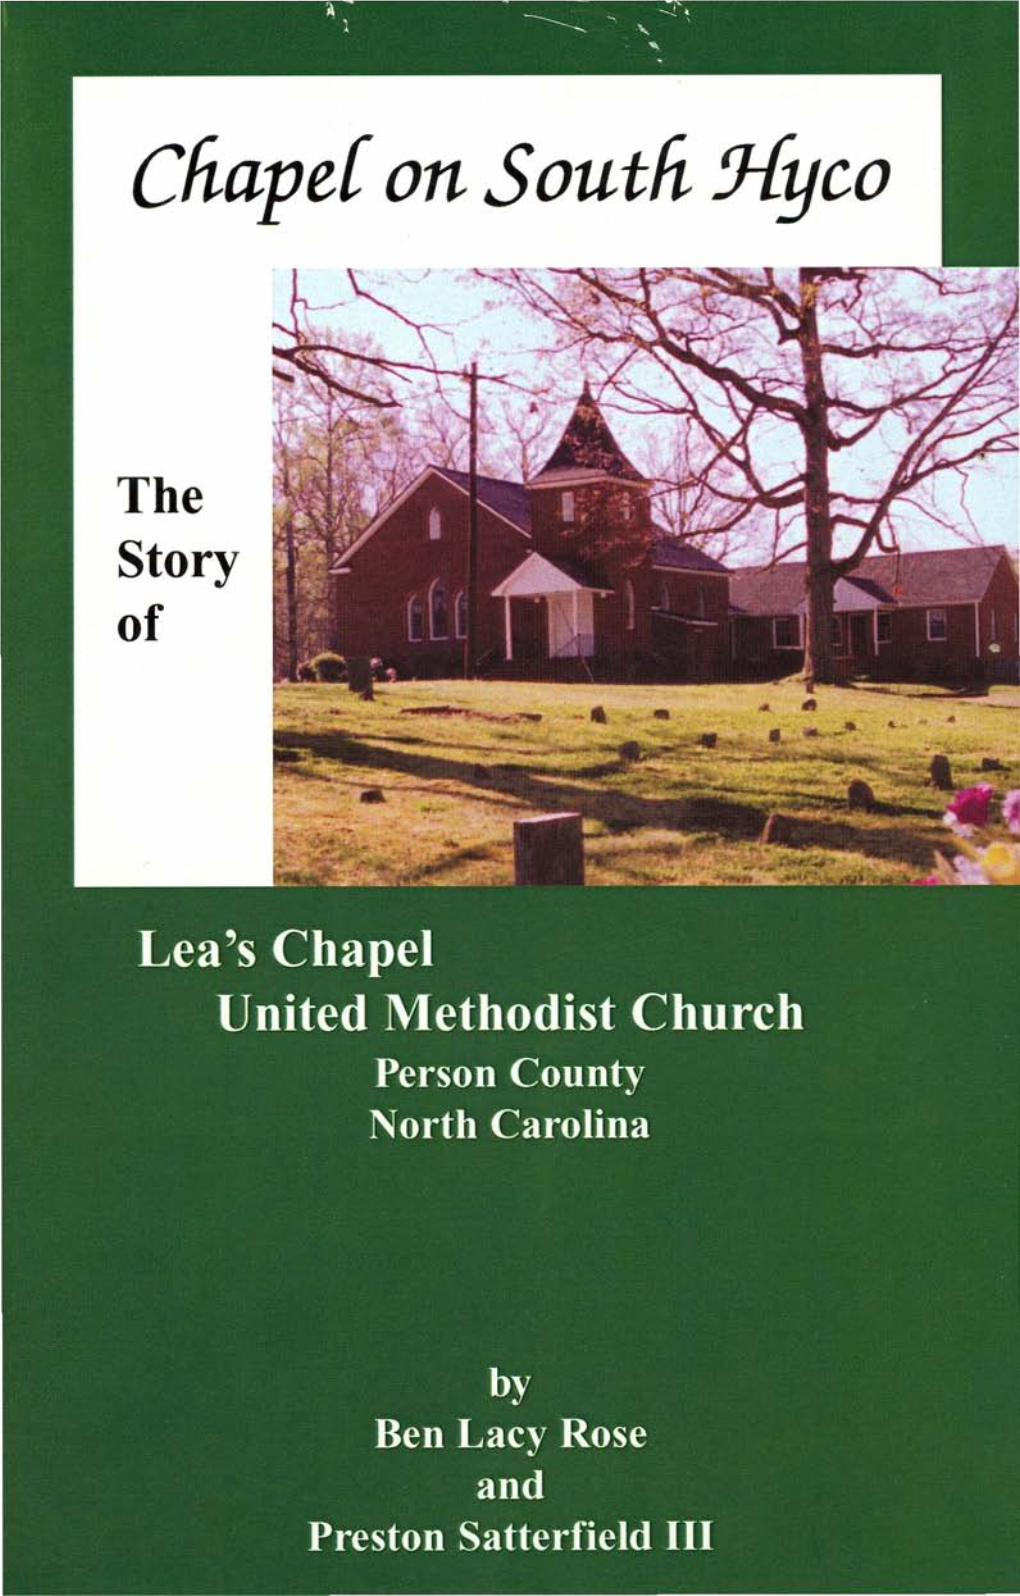 Chapel on South Hyco, the Story of Lea's Chapel United Methodist Church, 1750-2000